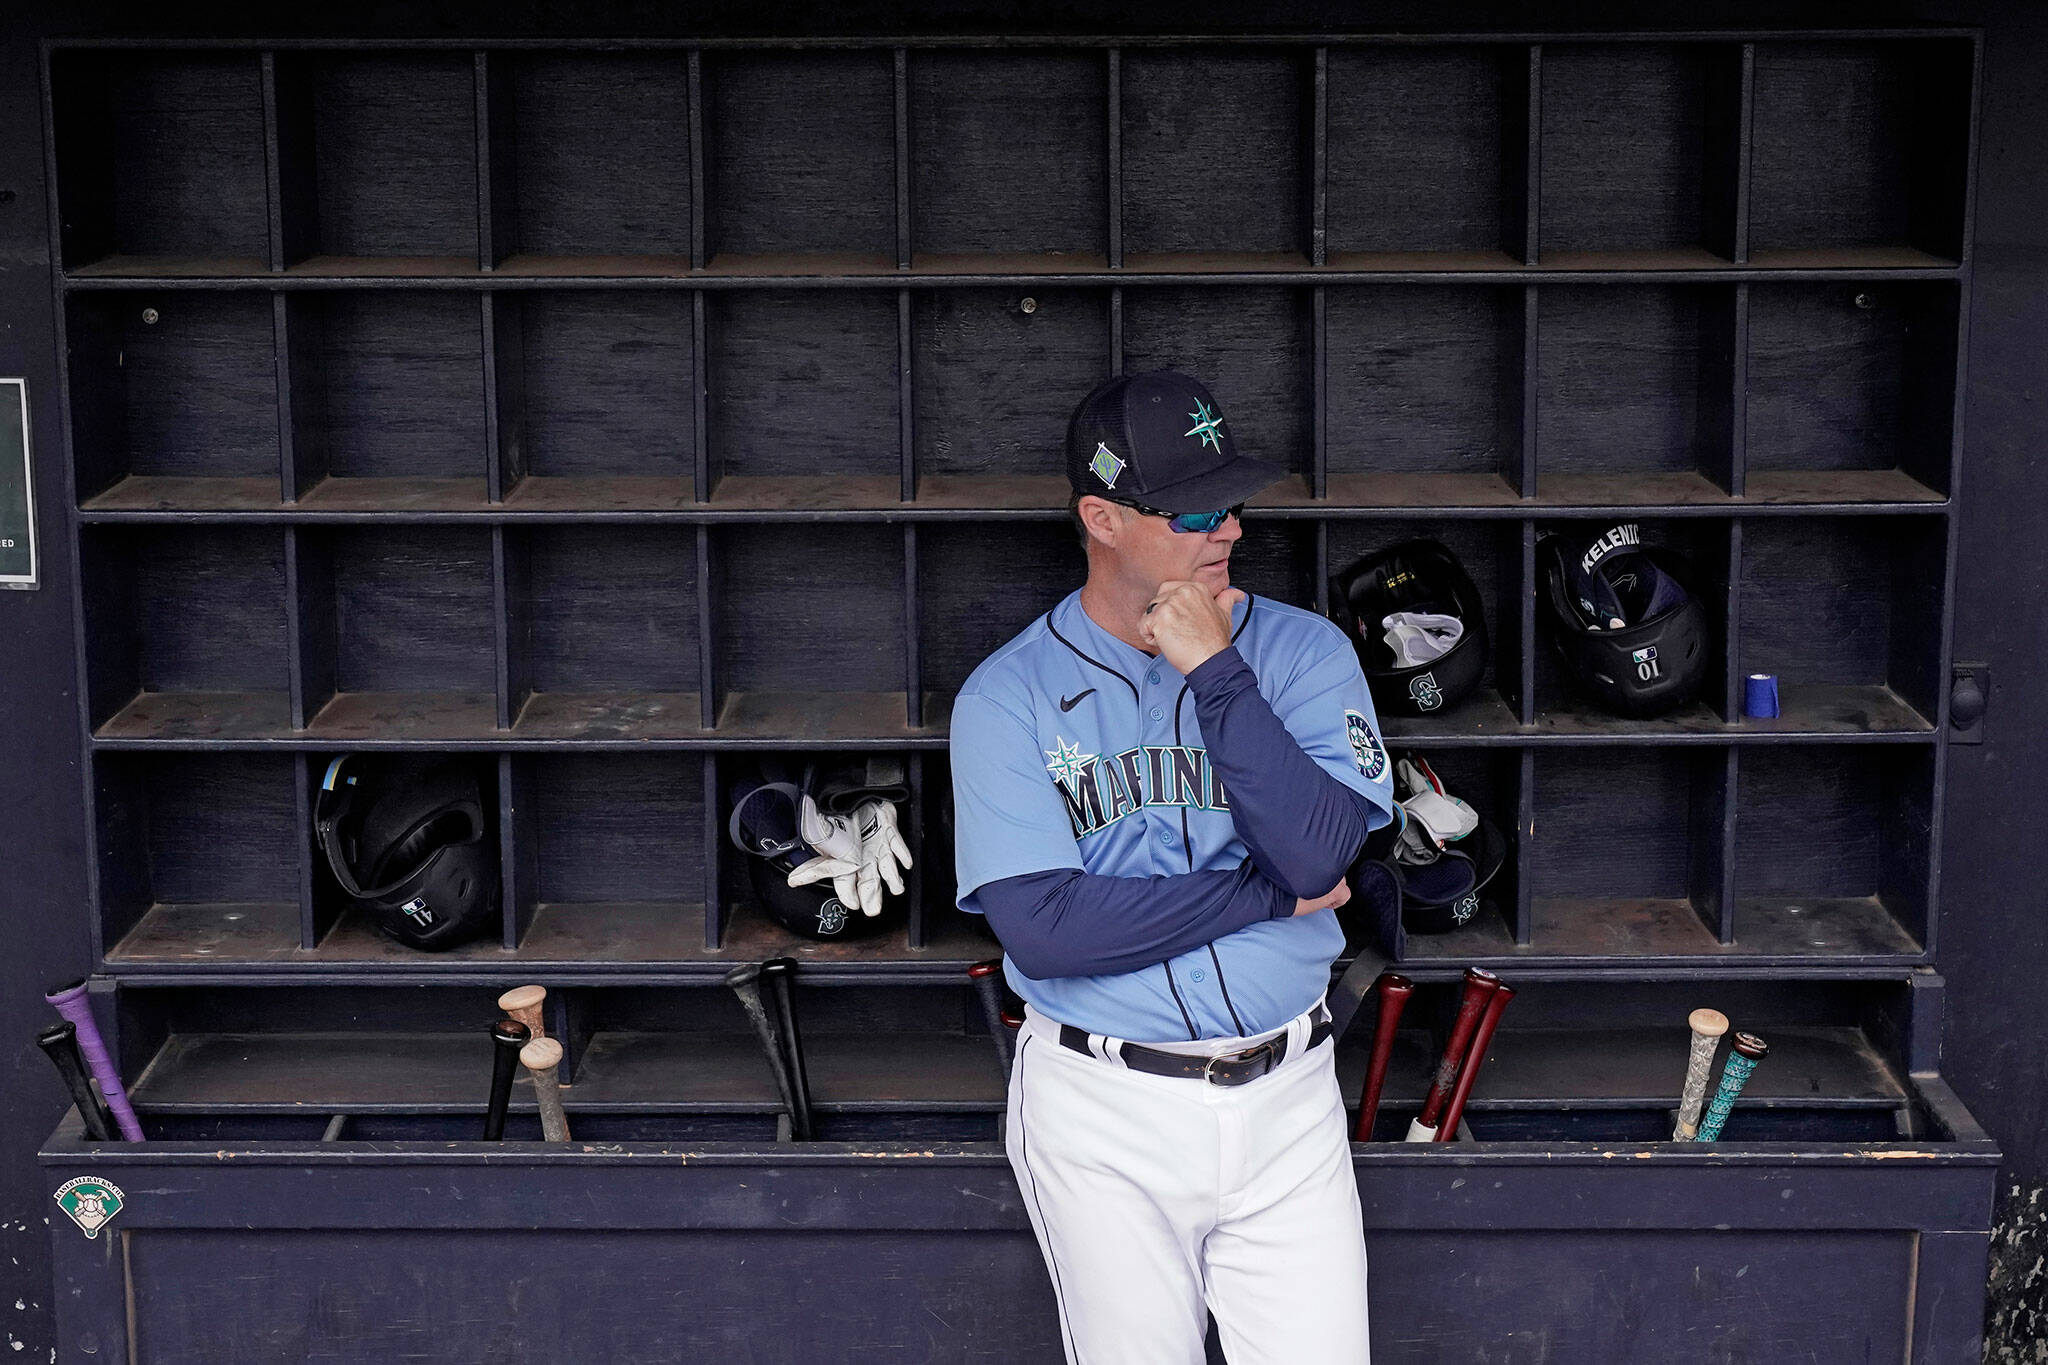 Mariners manager Scott Servais waits in the dugout before a spring training game against the Royals on March 29, 2022, in Peoria, Ariz. (AP Photo/Charlie Riedel)